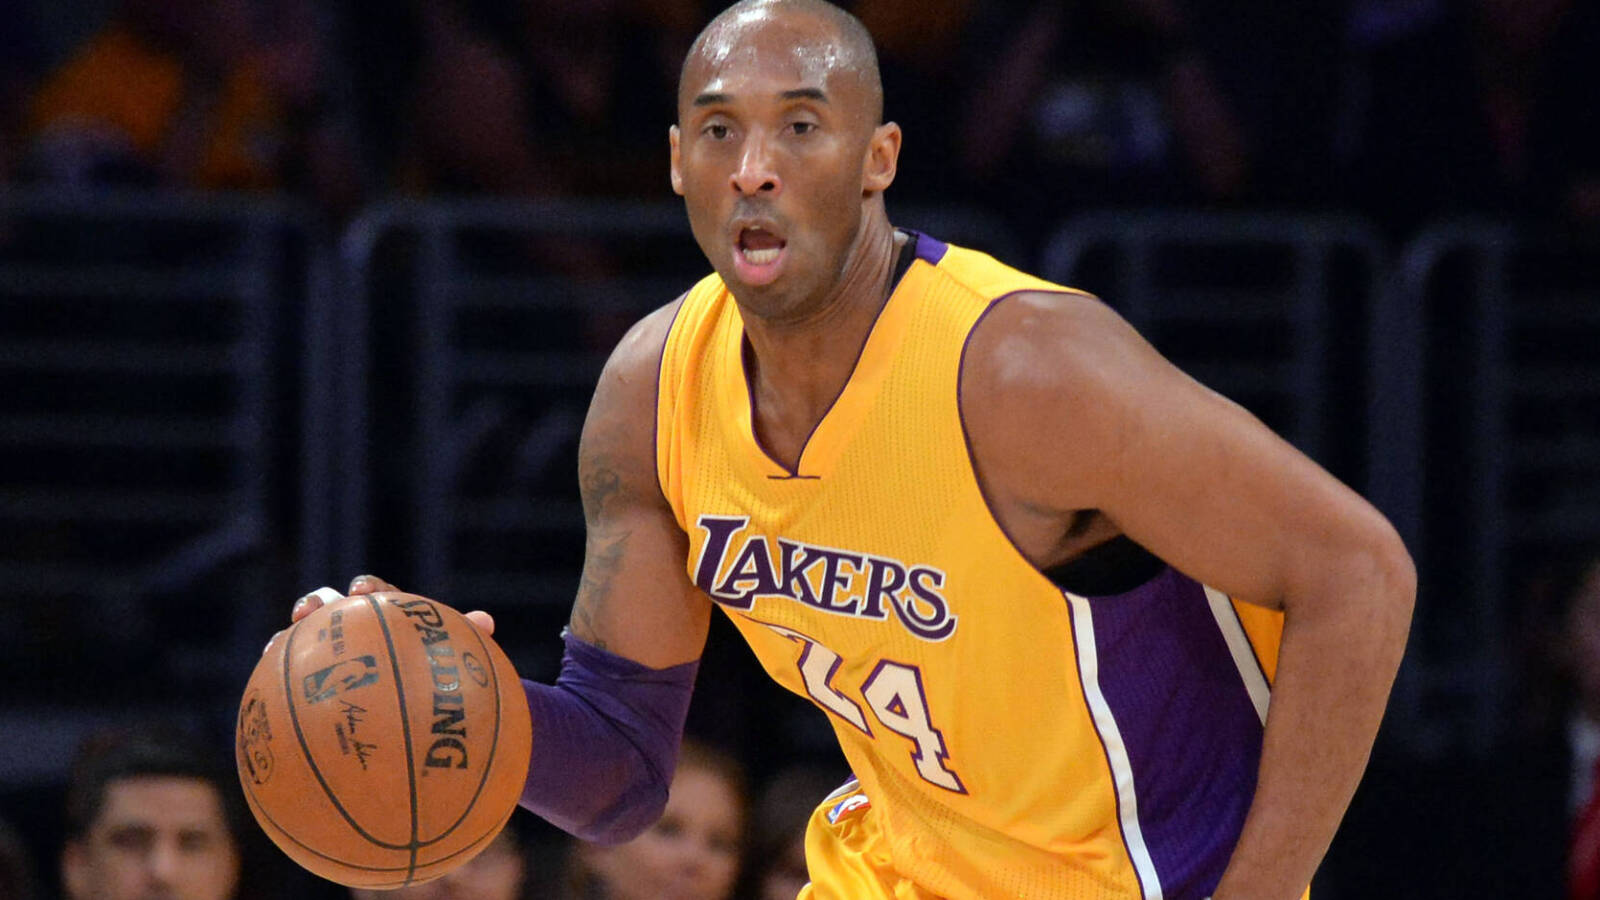 Stephen A. Smith: Kobe Bryant 'scared the living s--- out of me'